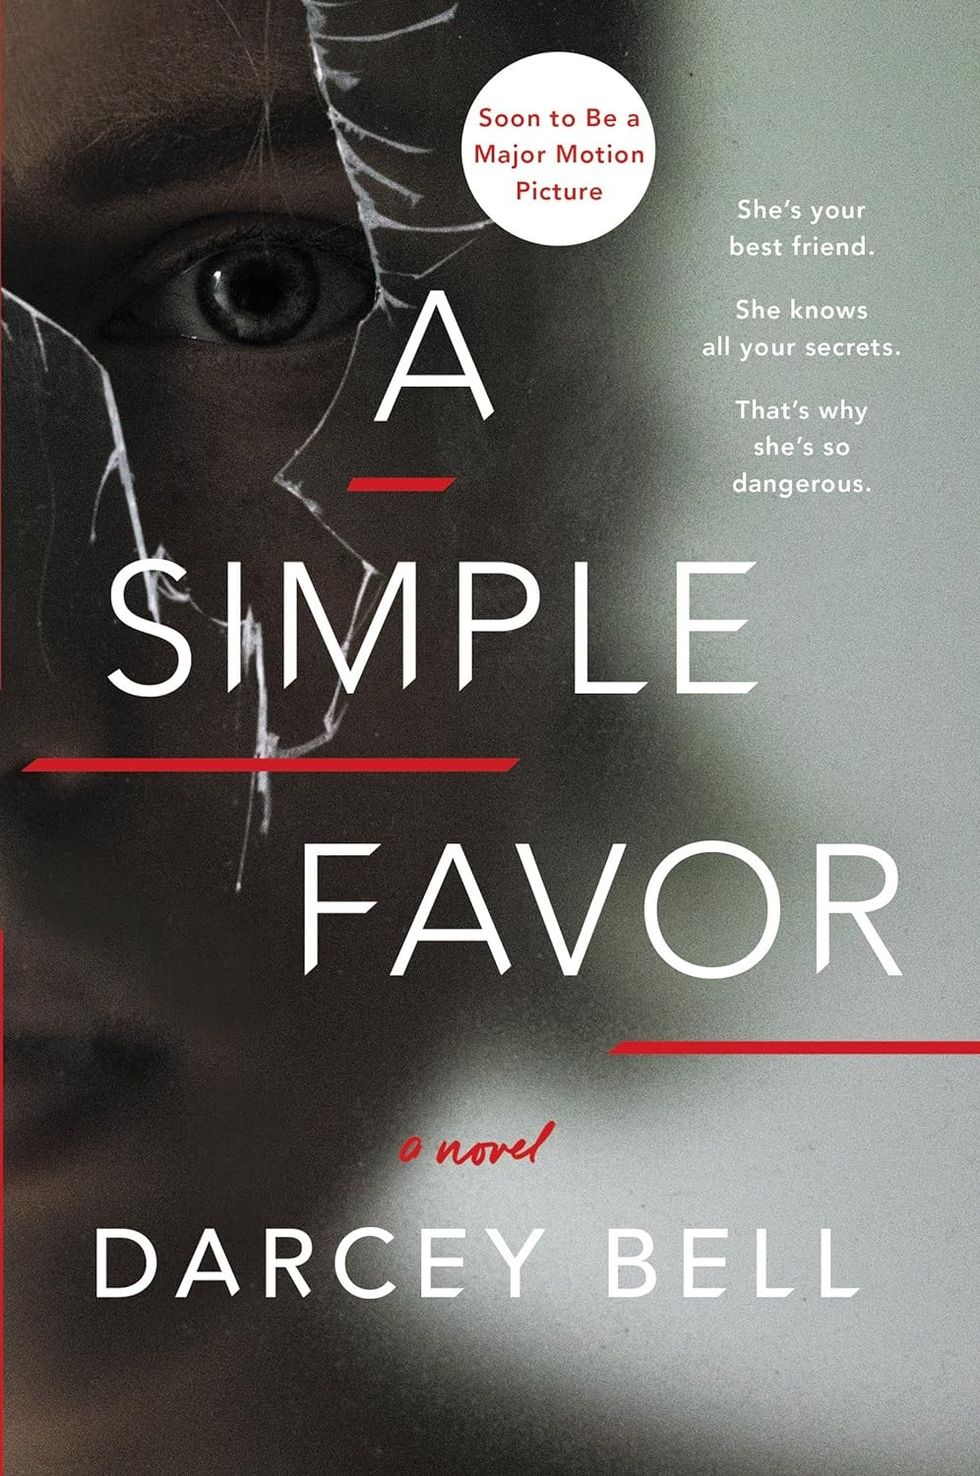 a simple favor book by darcey bell